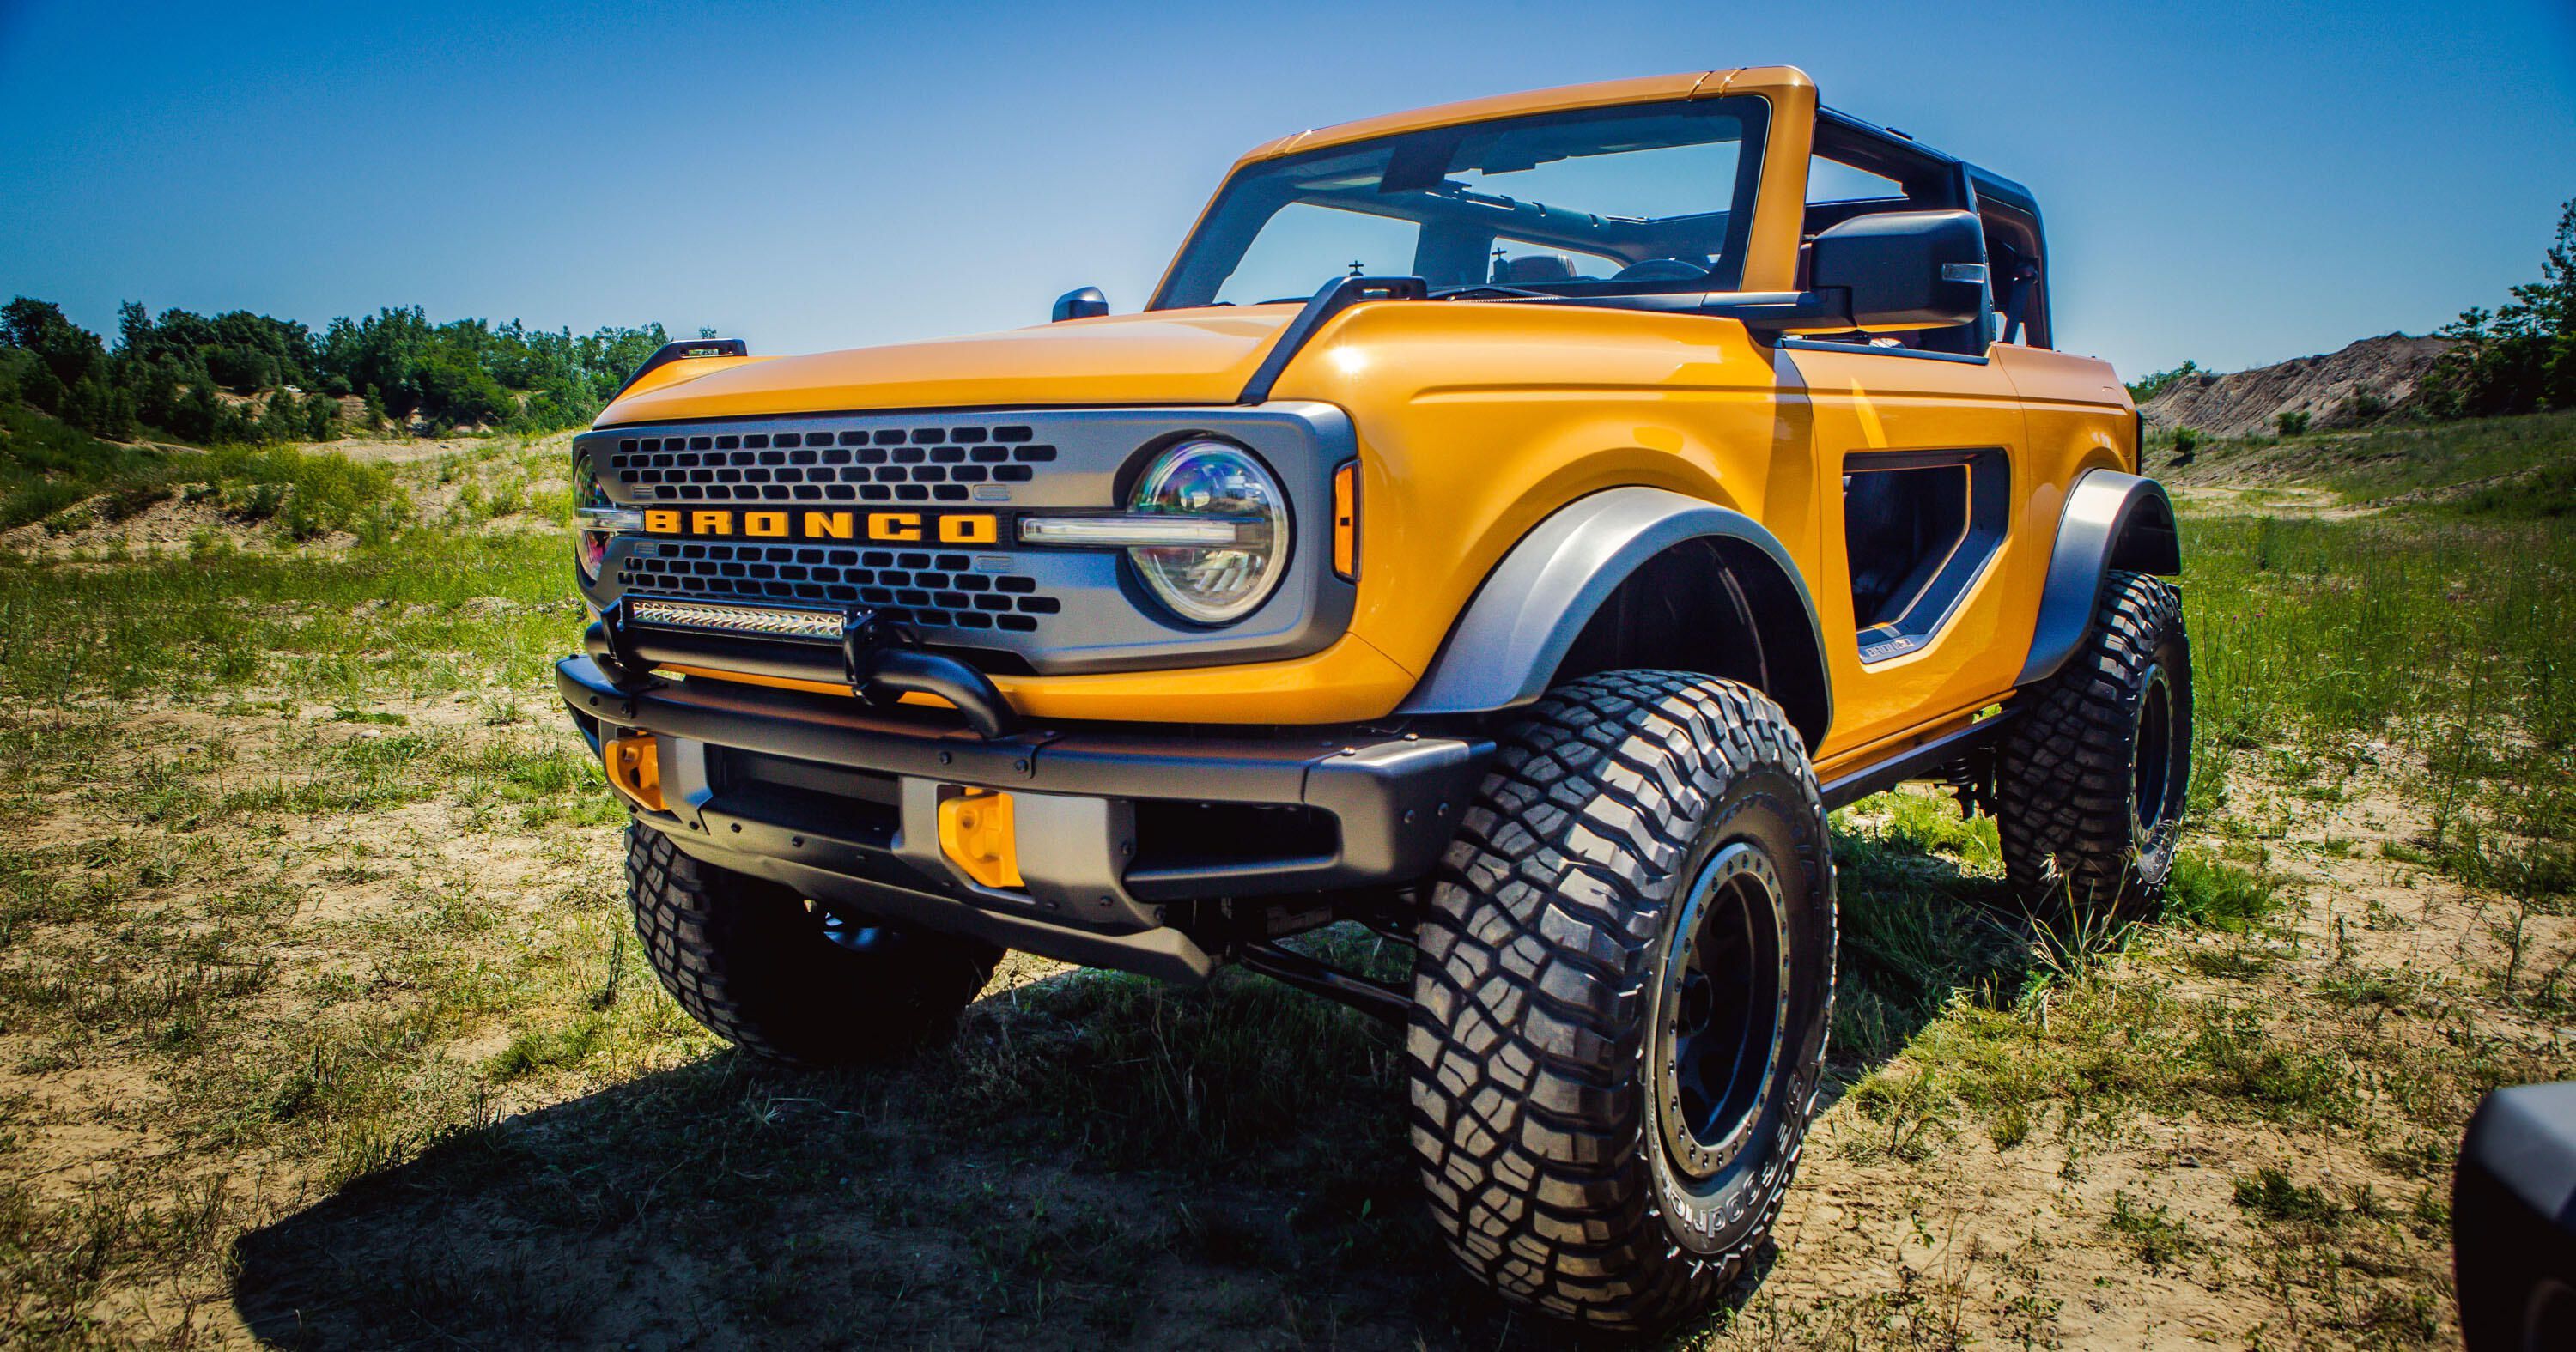 Ford Bronco Pricing: Here's How Much The 2 Door And 4 Door